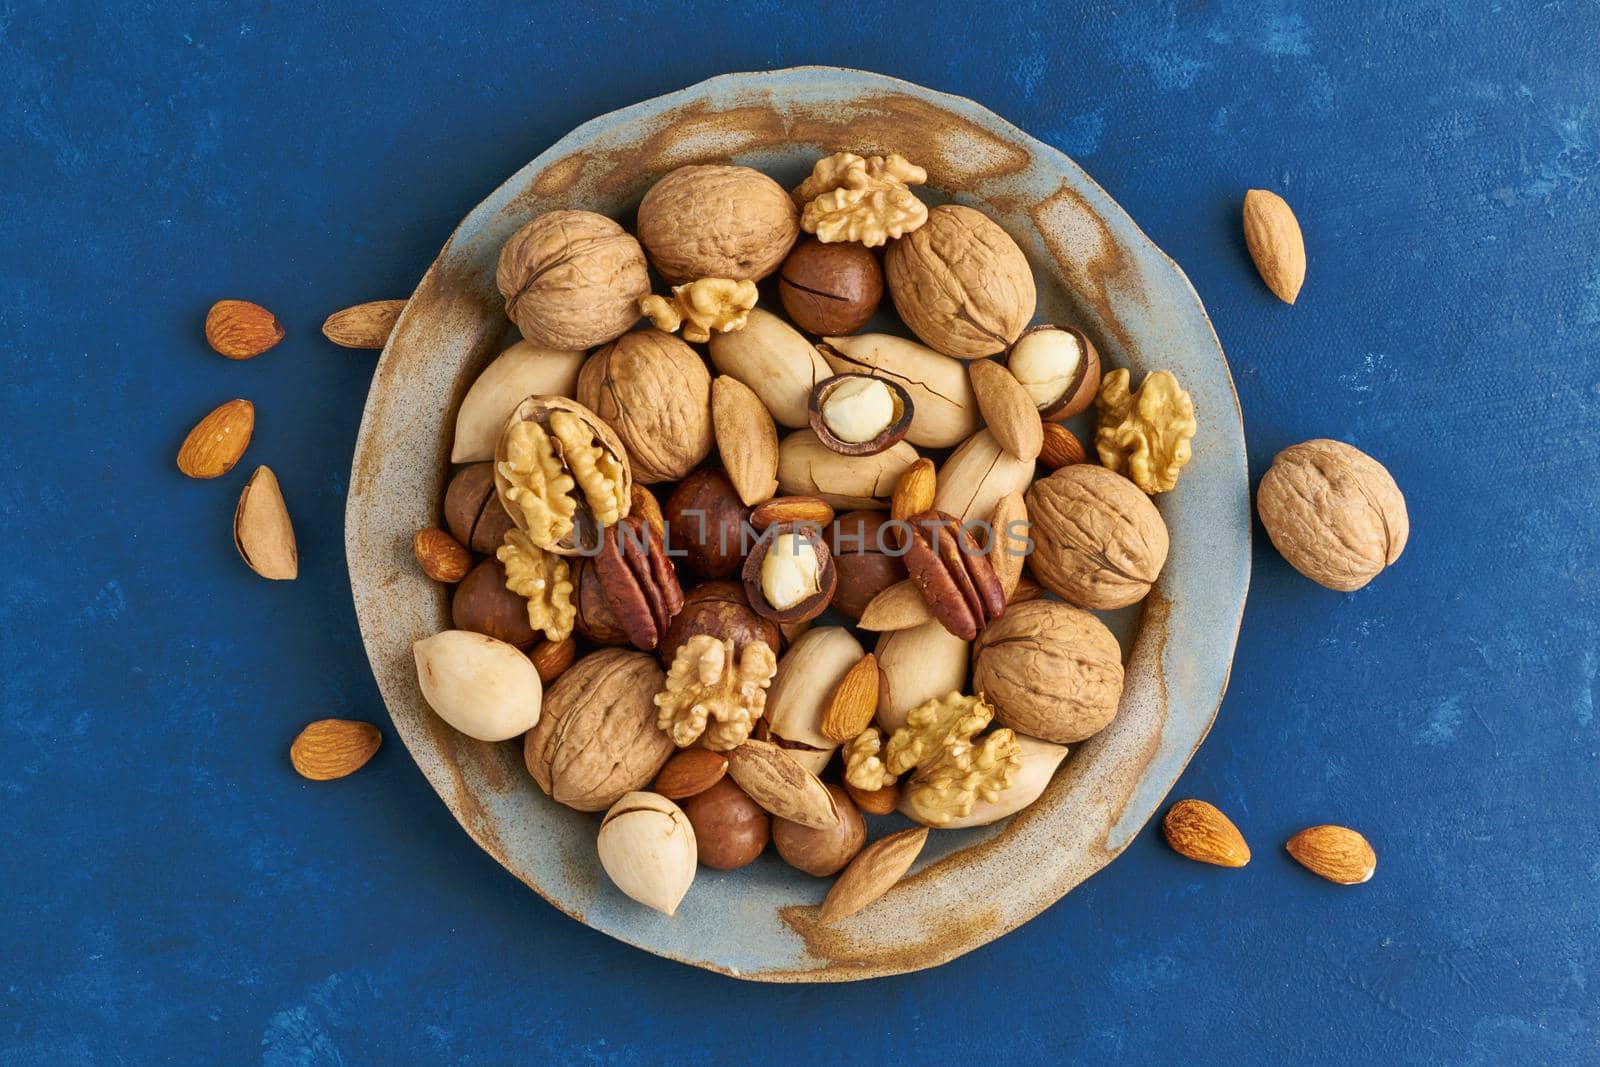 Classic blue in a food. Mix of nuts on plate - walnut, almonds, pecans, macadamia and knife for opening shell. Healthy vegan food. Clean eating, balanced diet. Top view